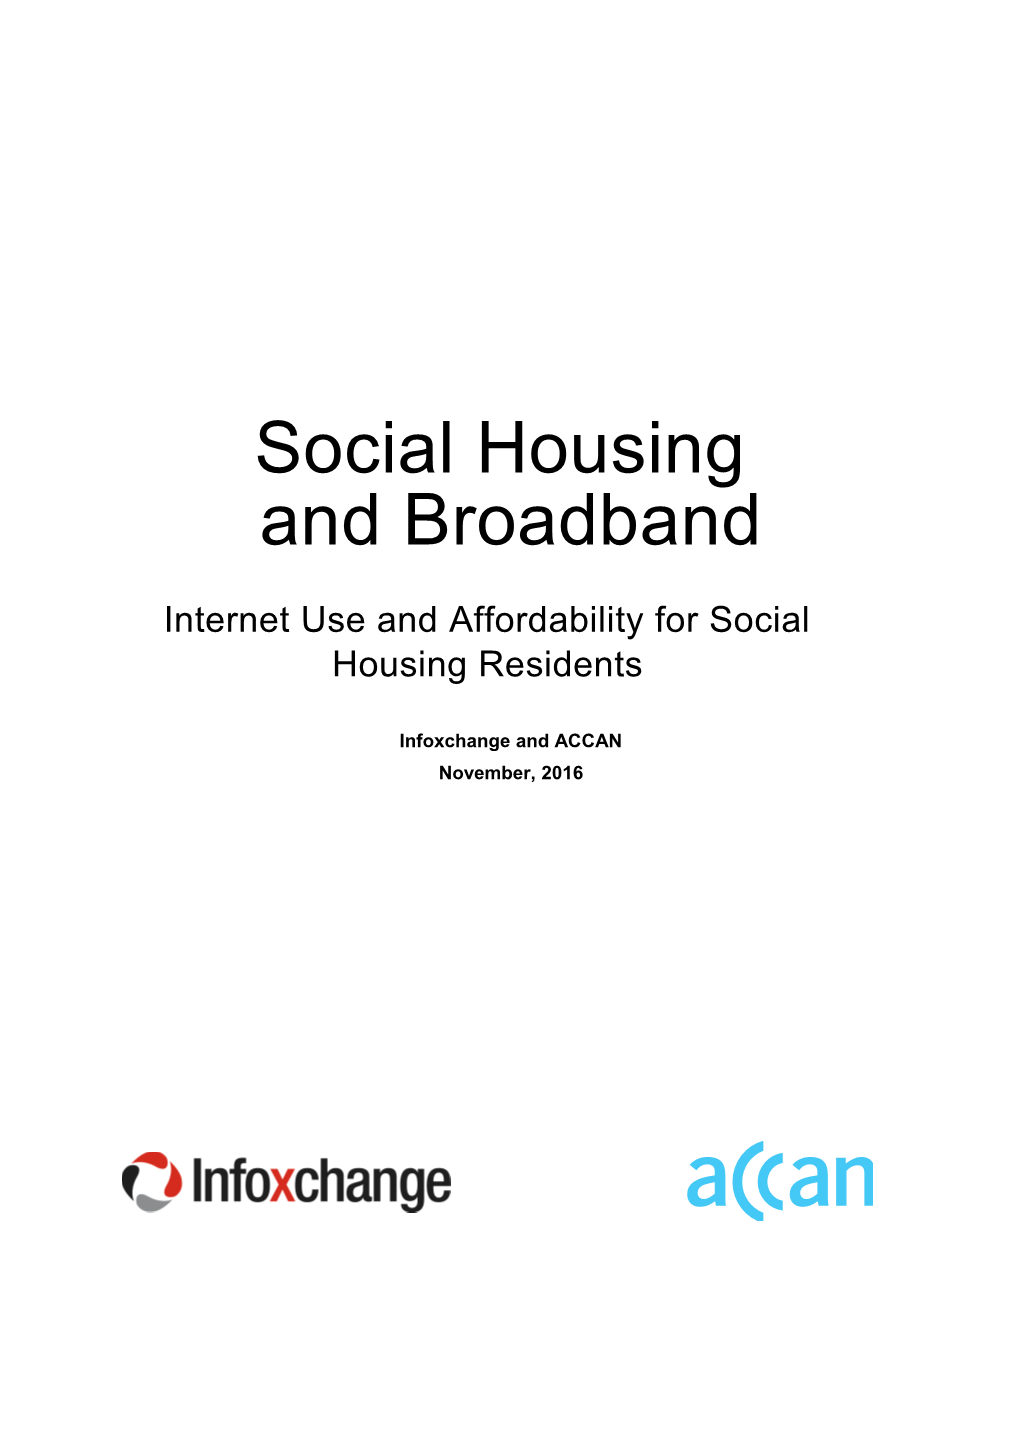 Social Housing and Broadband: Internet Use and Affordability for Social Housing Residents